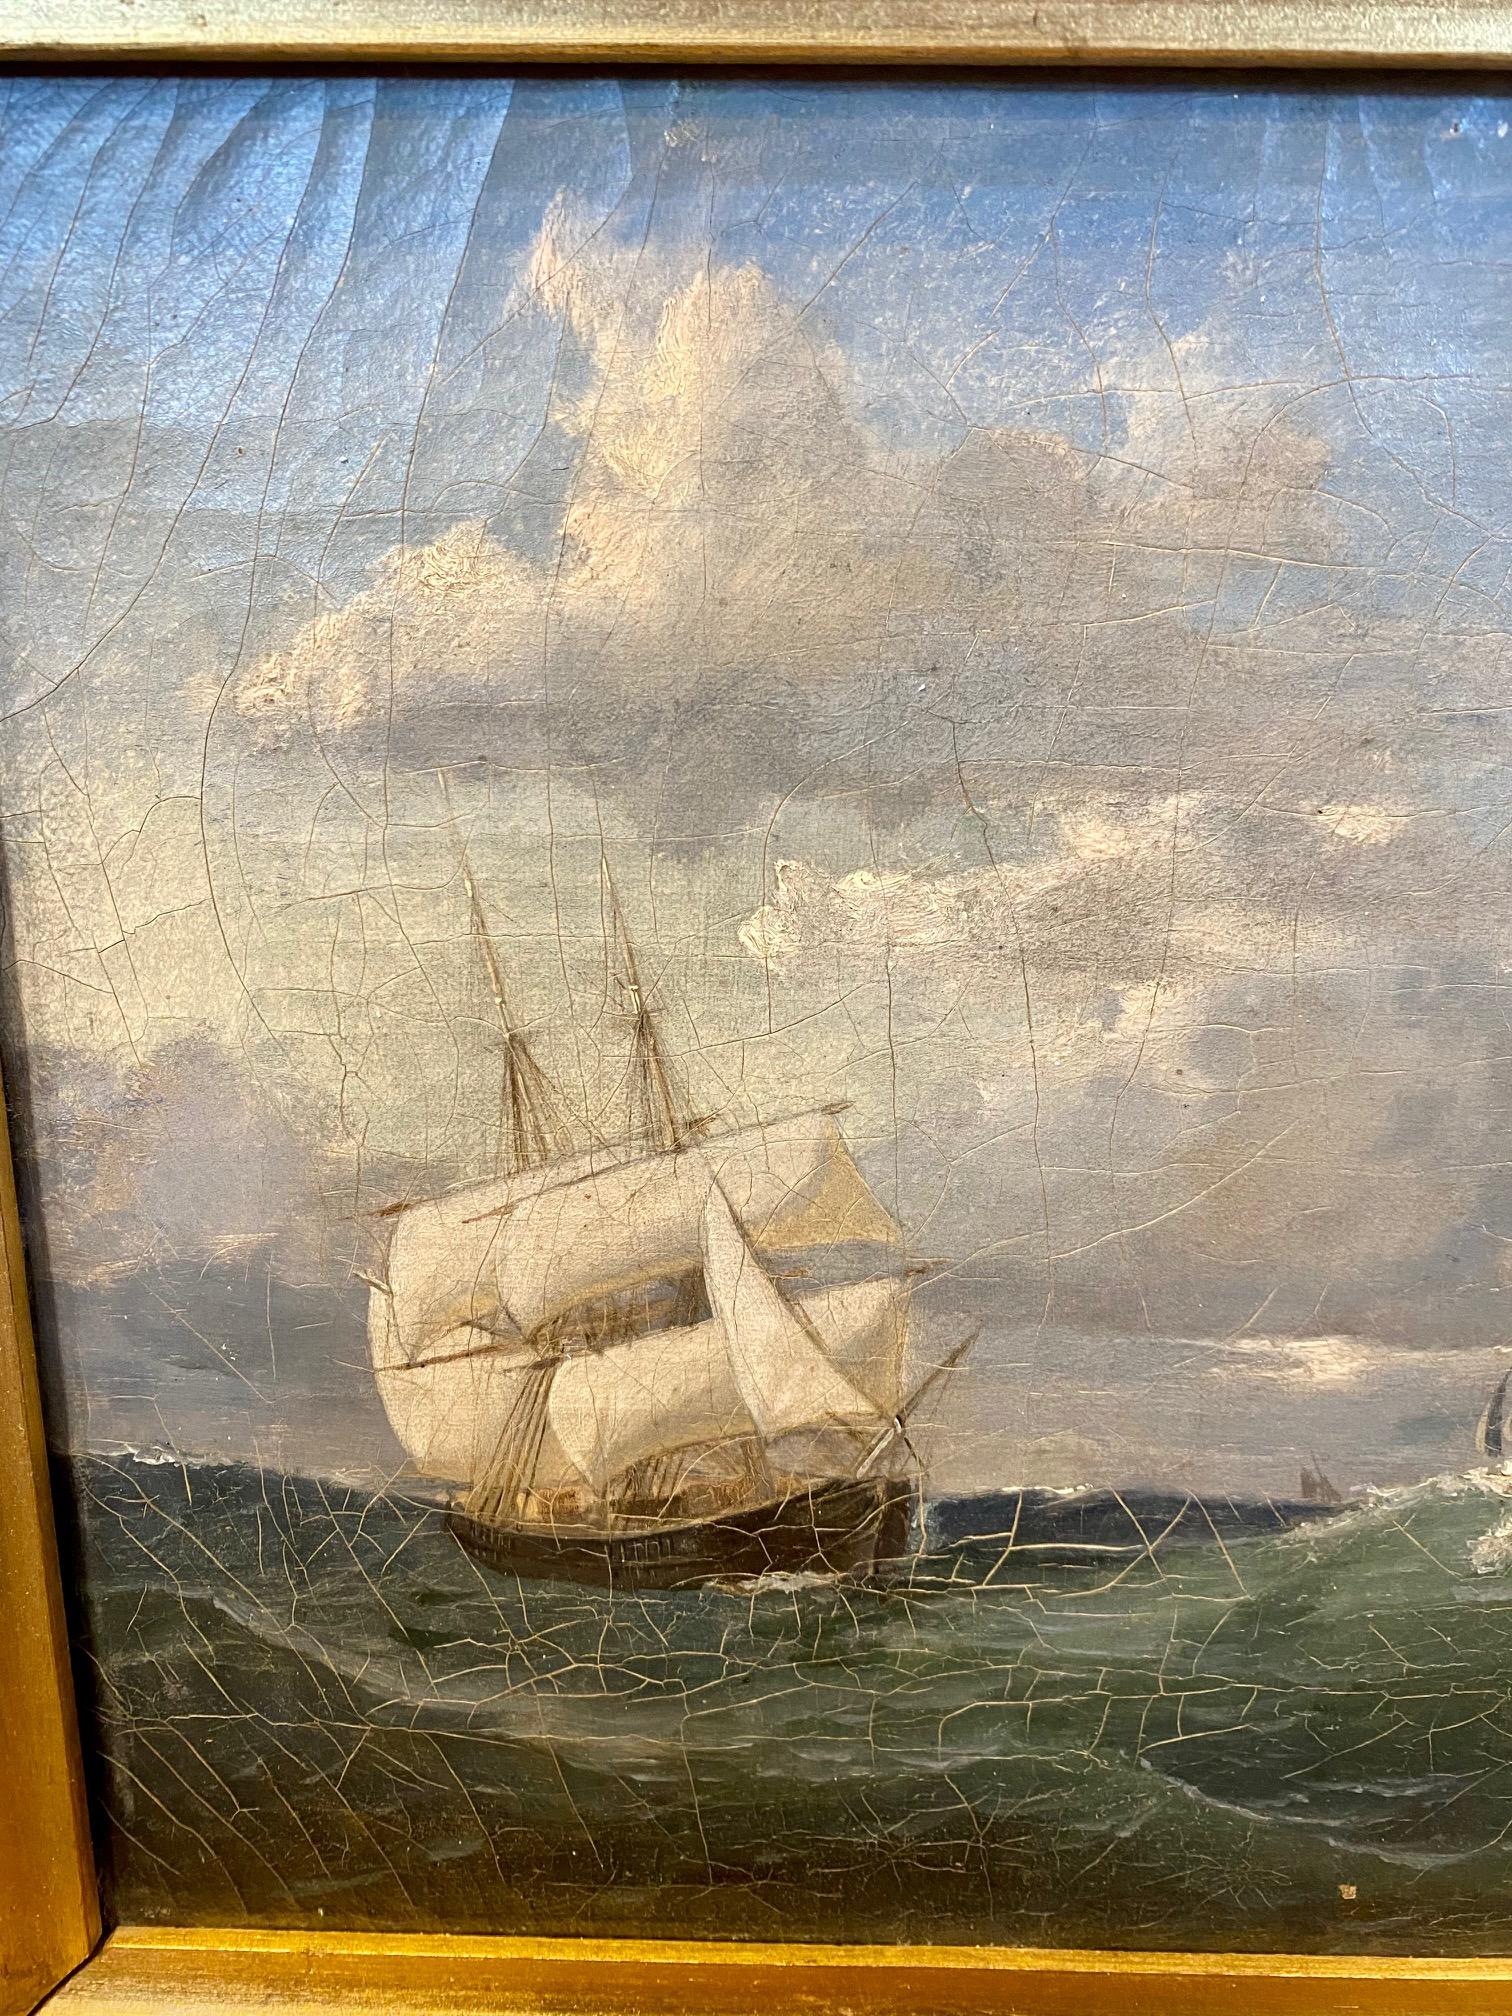 19th Century Seascape with a Brig in High Seas, signed illegibly and dated 1857, an oil on canvas painting featuring a Brig laboring in heavy seas under reefed topsails and top-gallants, another schooner under sail in background. The painting has a